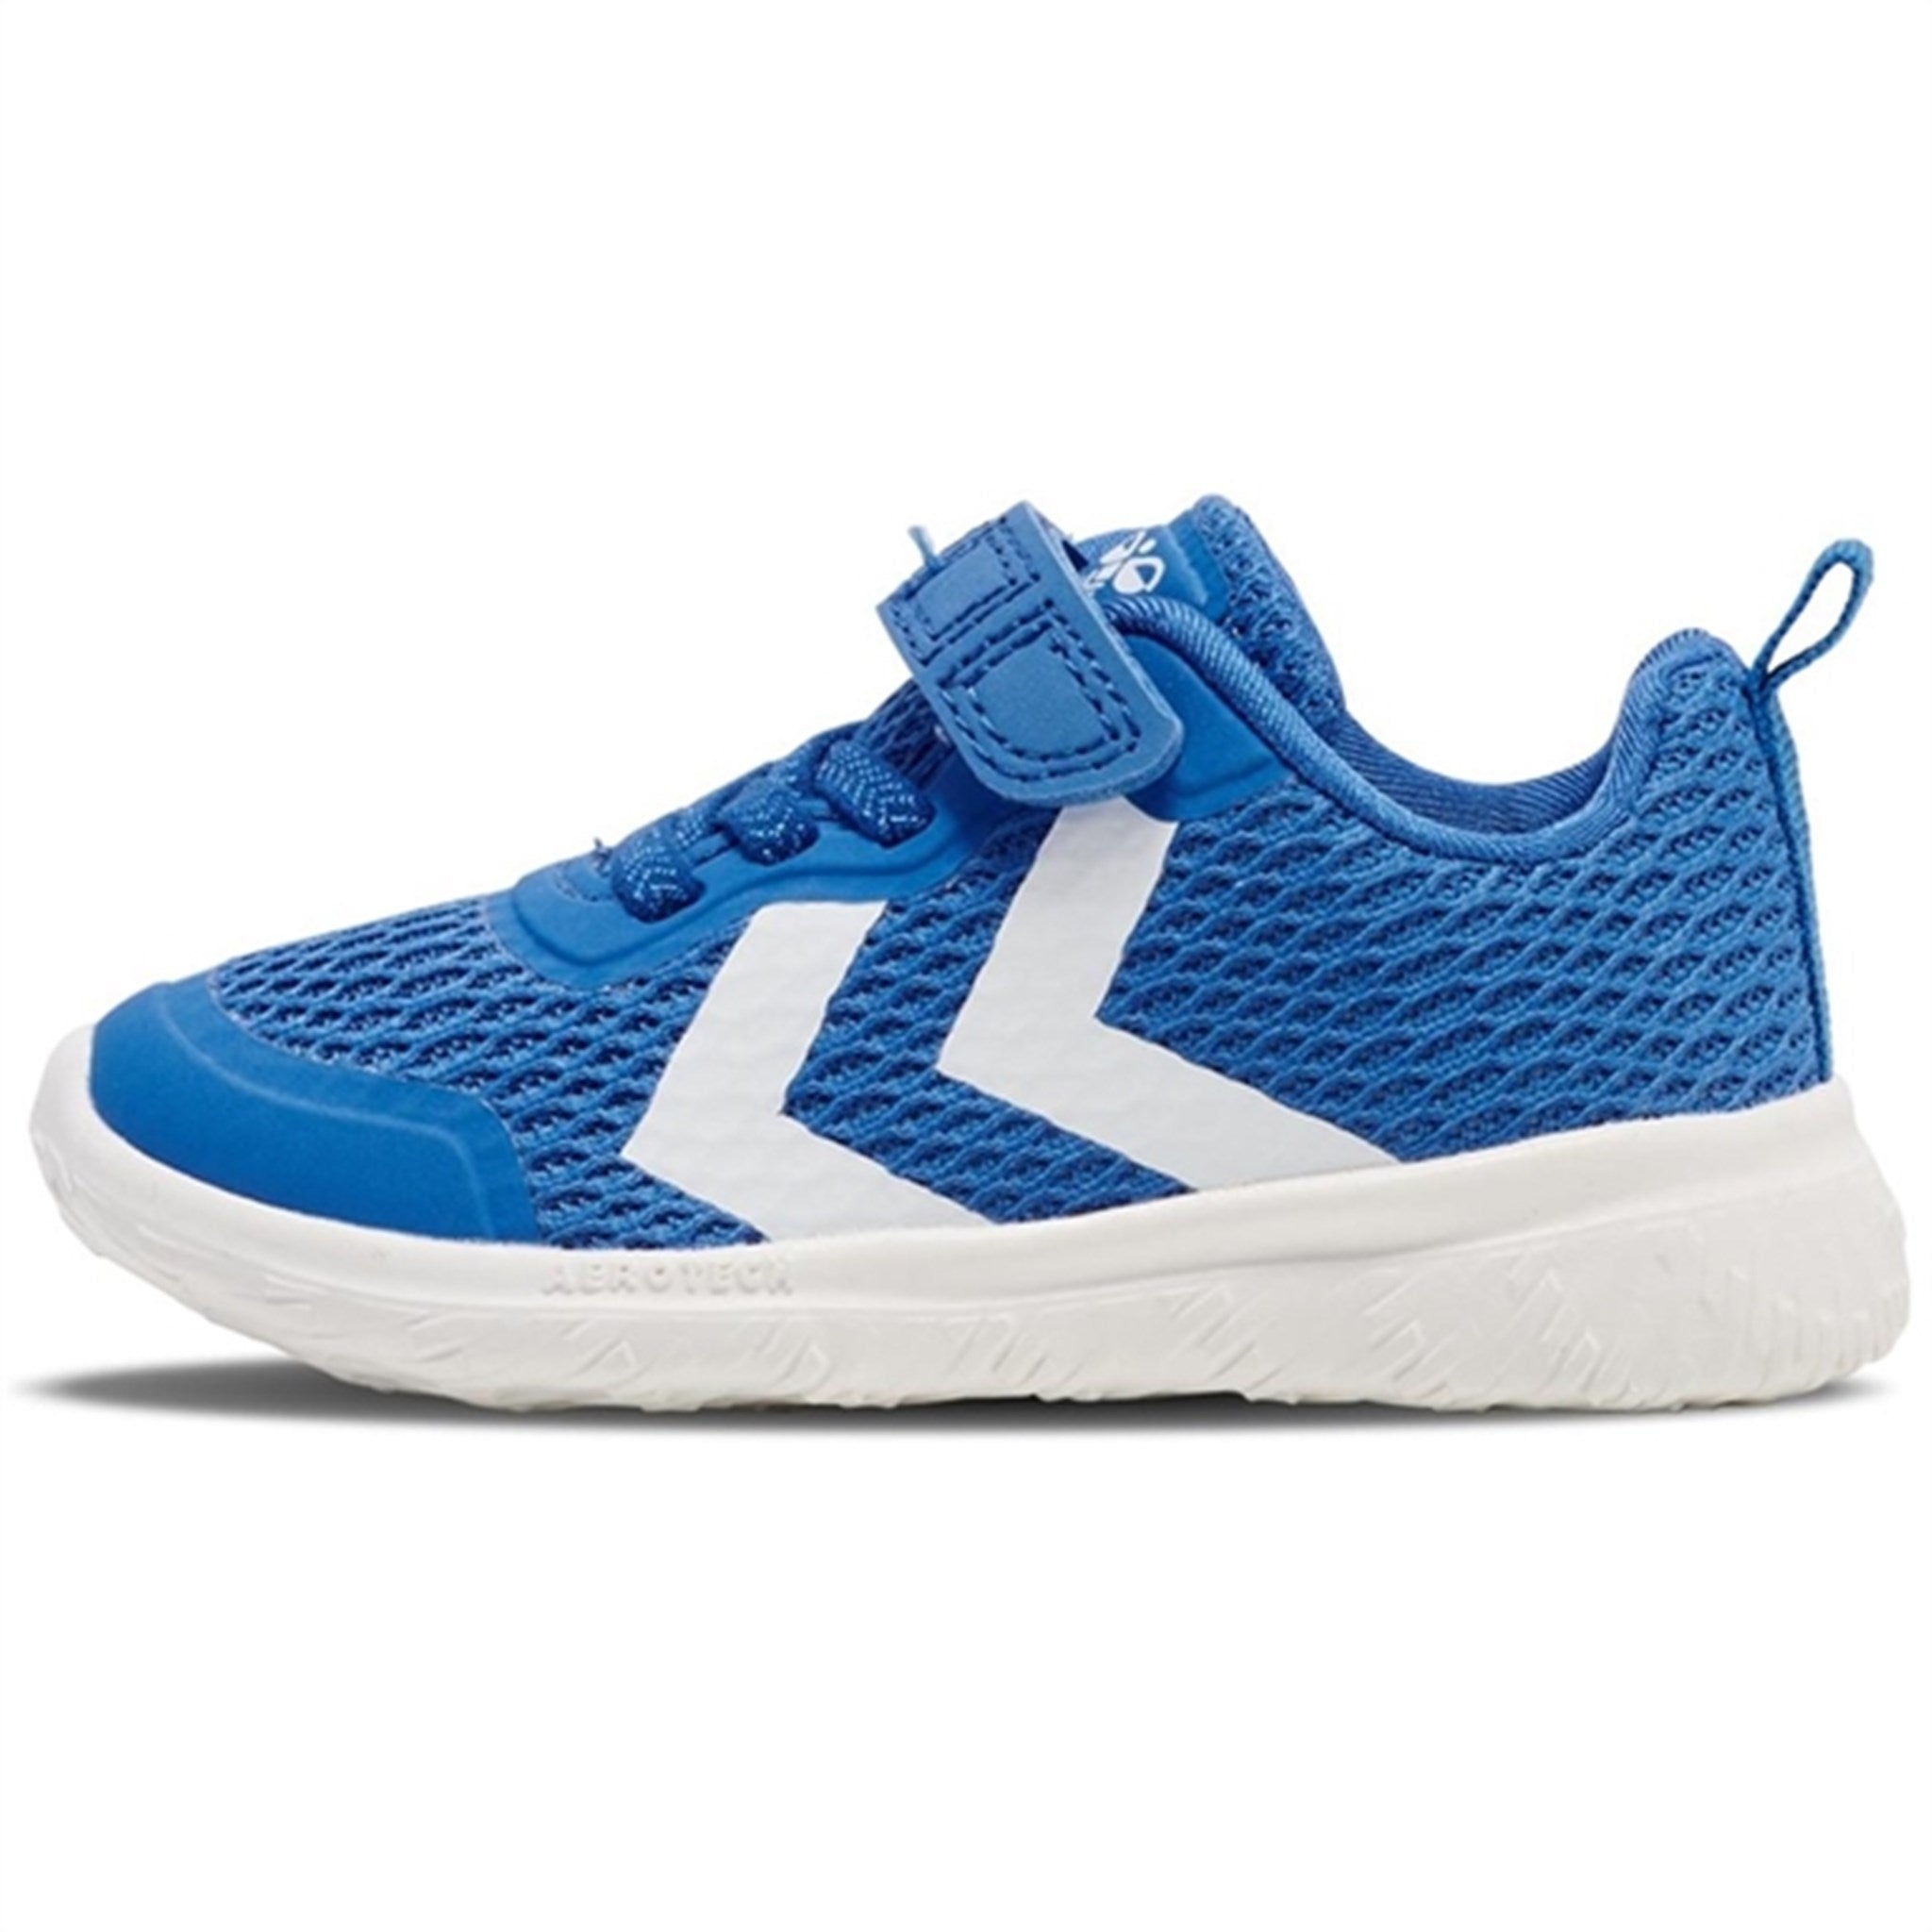 Hummel Blue/White Actus Recycled Infant Sneakers Blue/White